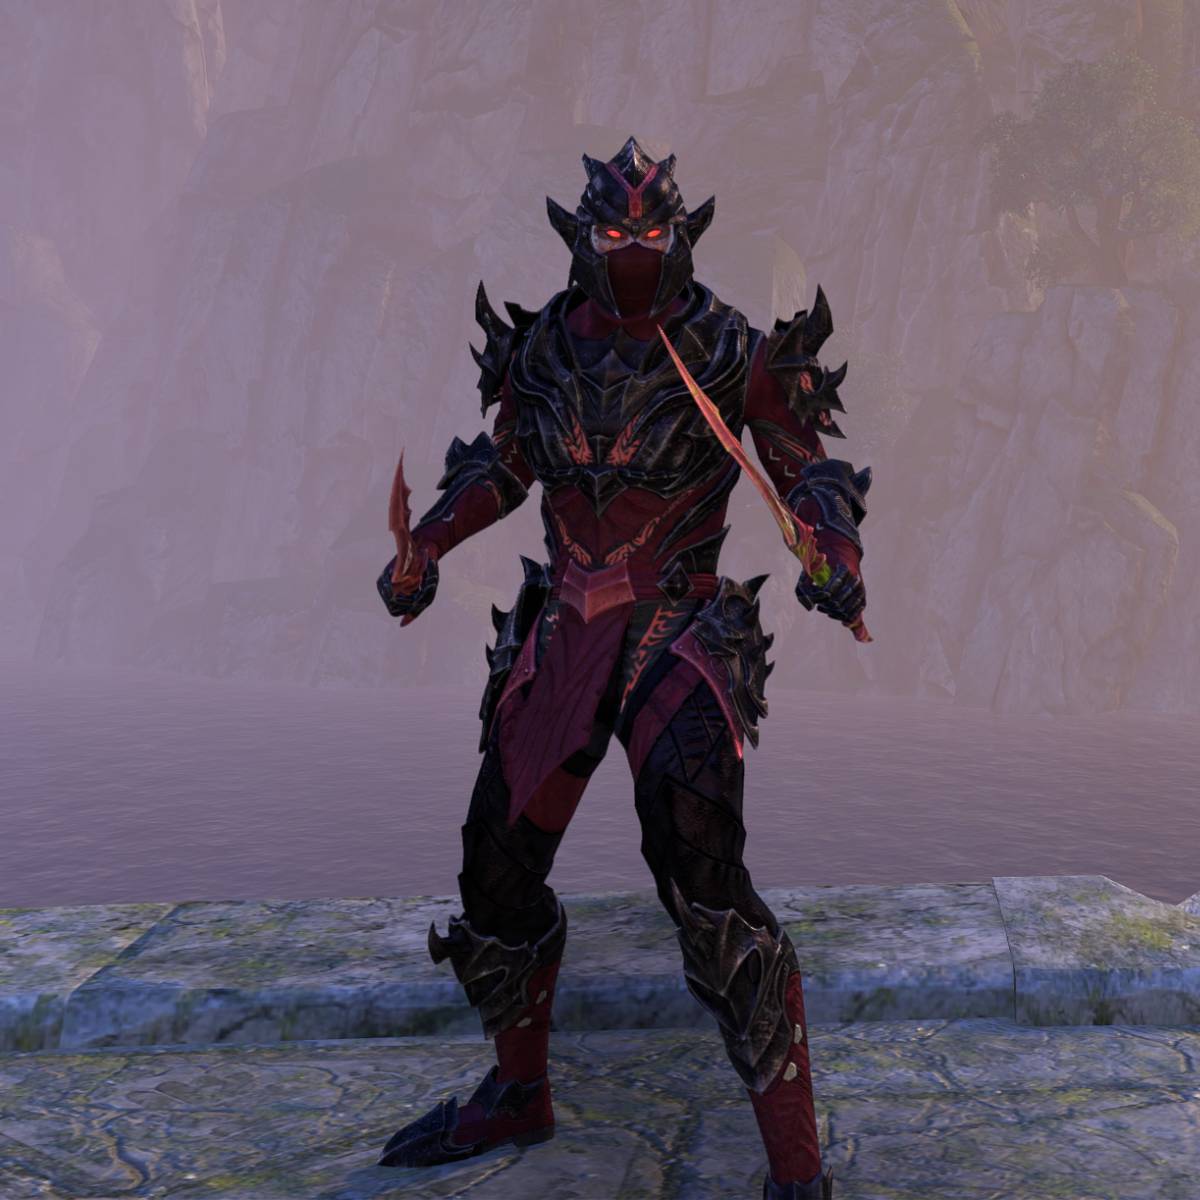 Stamina Necromancer Reaper Build for ESO Outfit 1